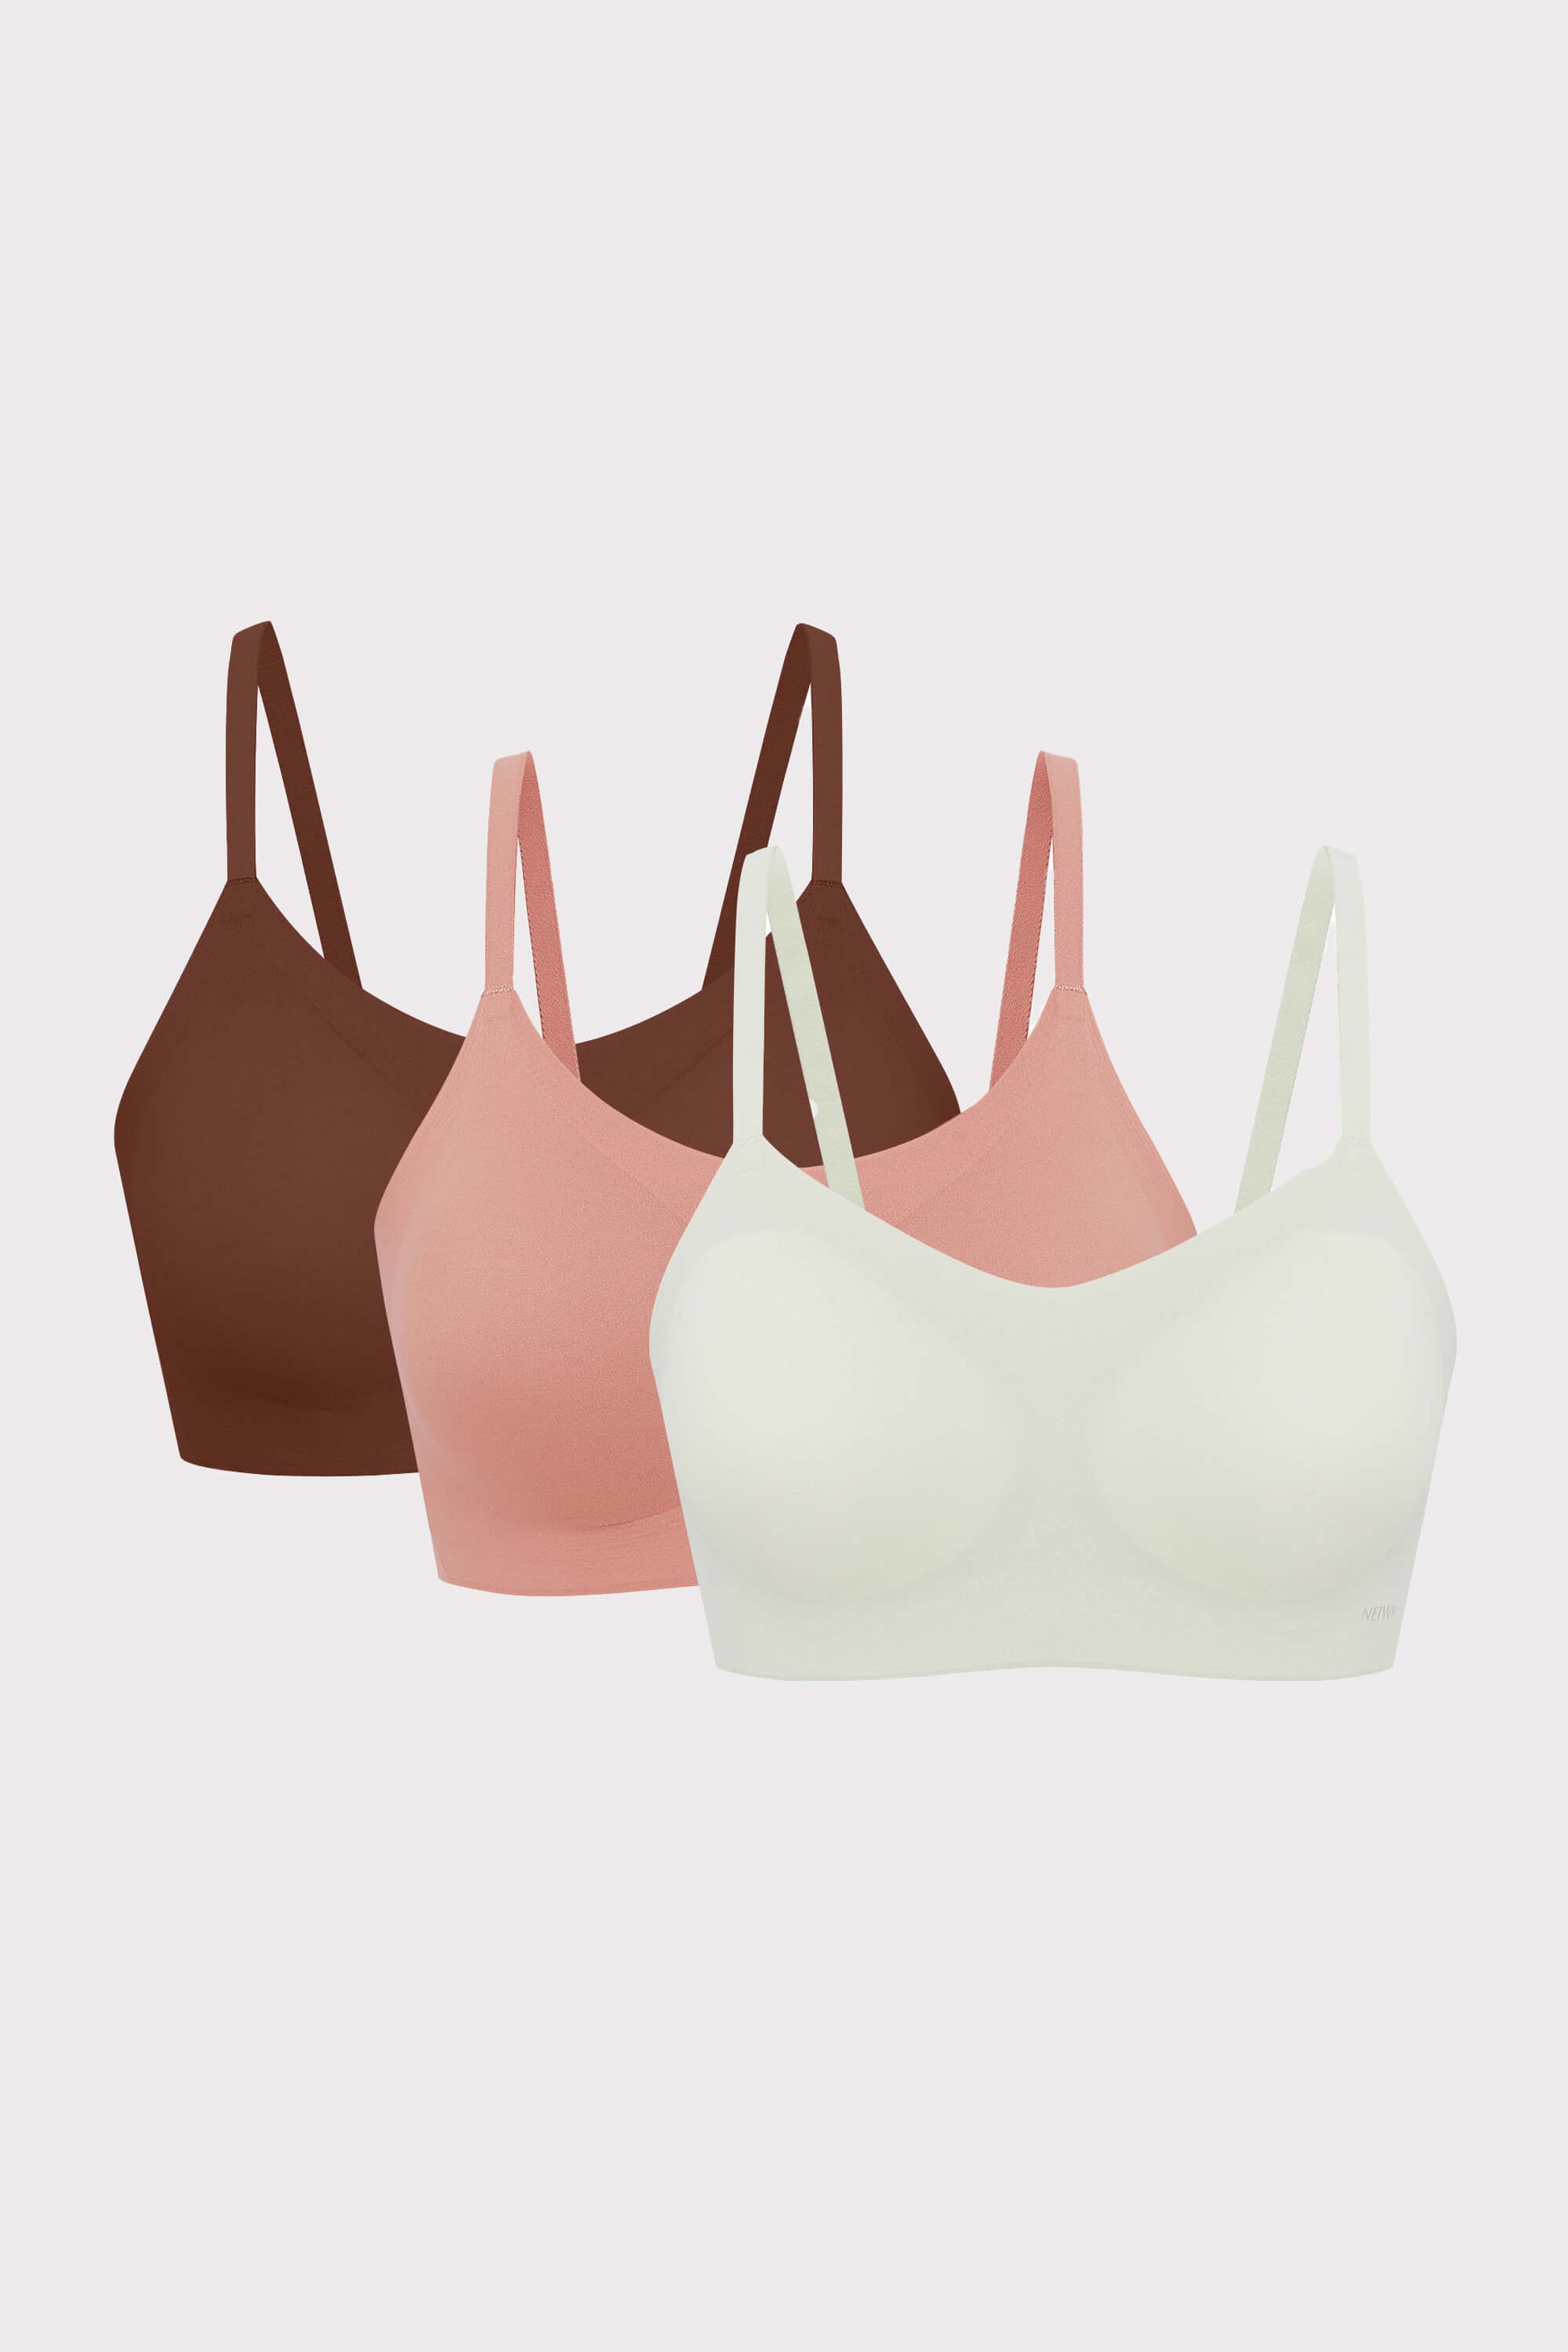  Teen Girls' Bra with Removable Cookies Spaghetti Strap